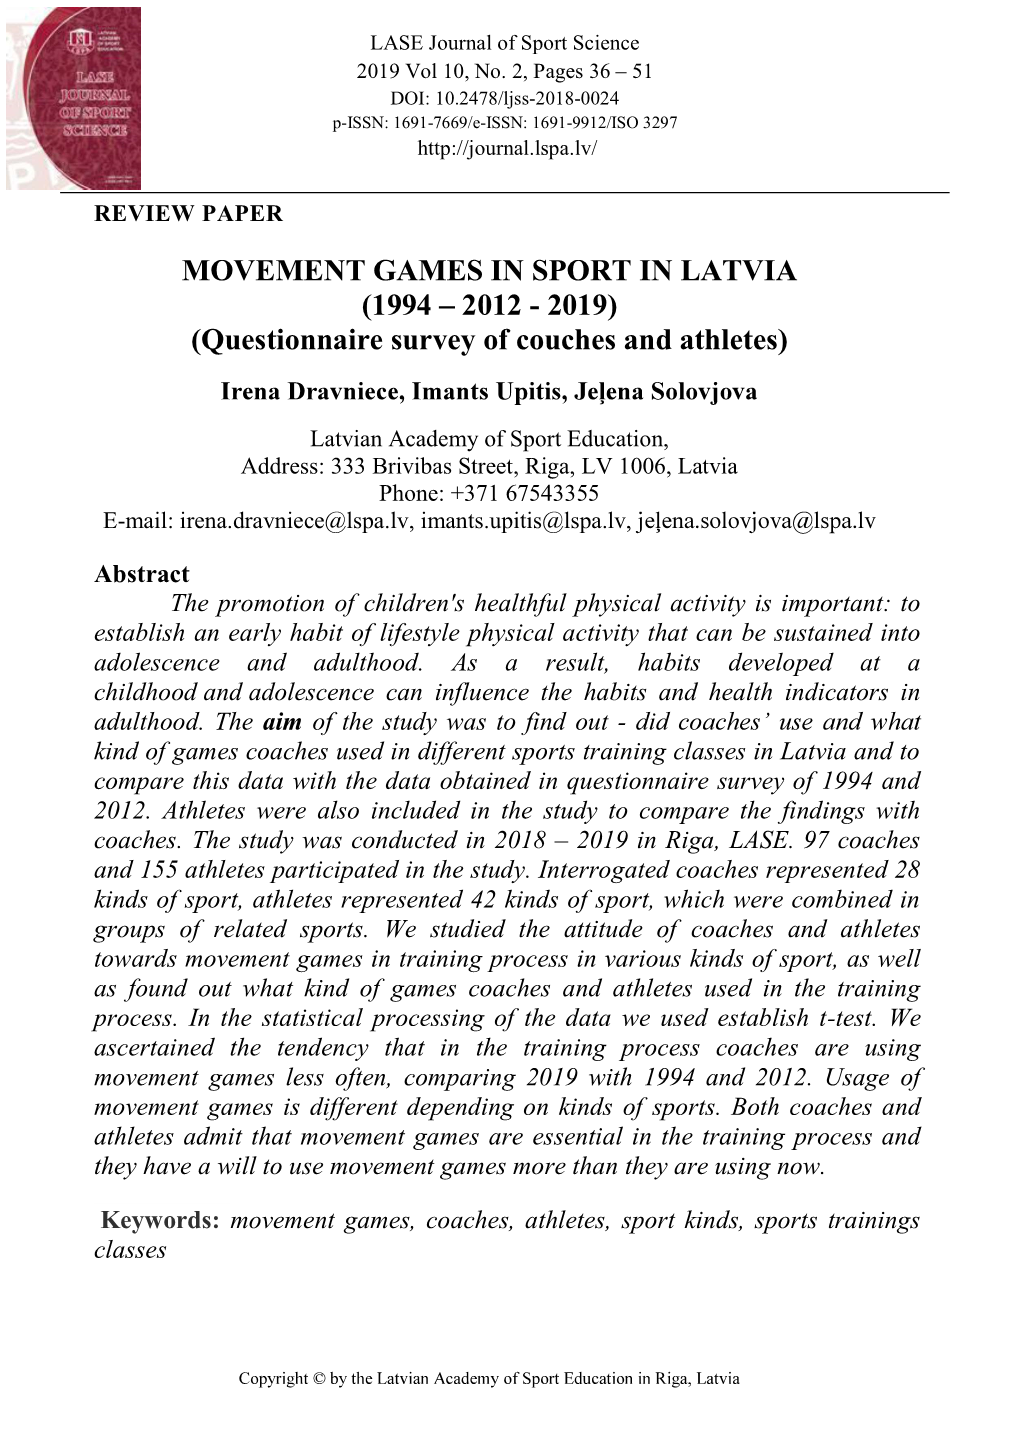 MOVEMENT GAMES in SPORT in LATVIA (1994 2012 - 2019) (Questionnaire Survey of Couches and Athletes)